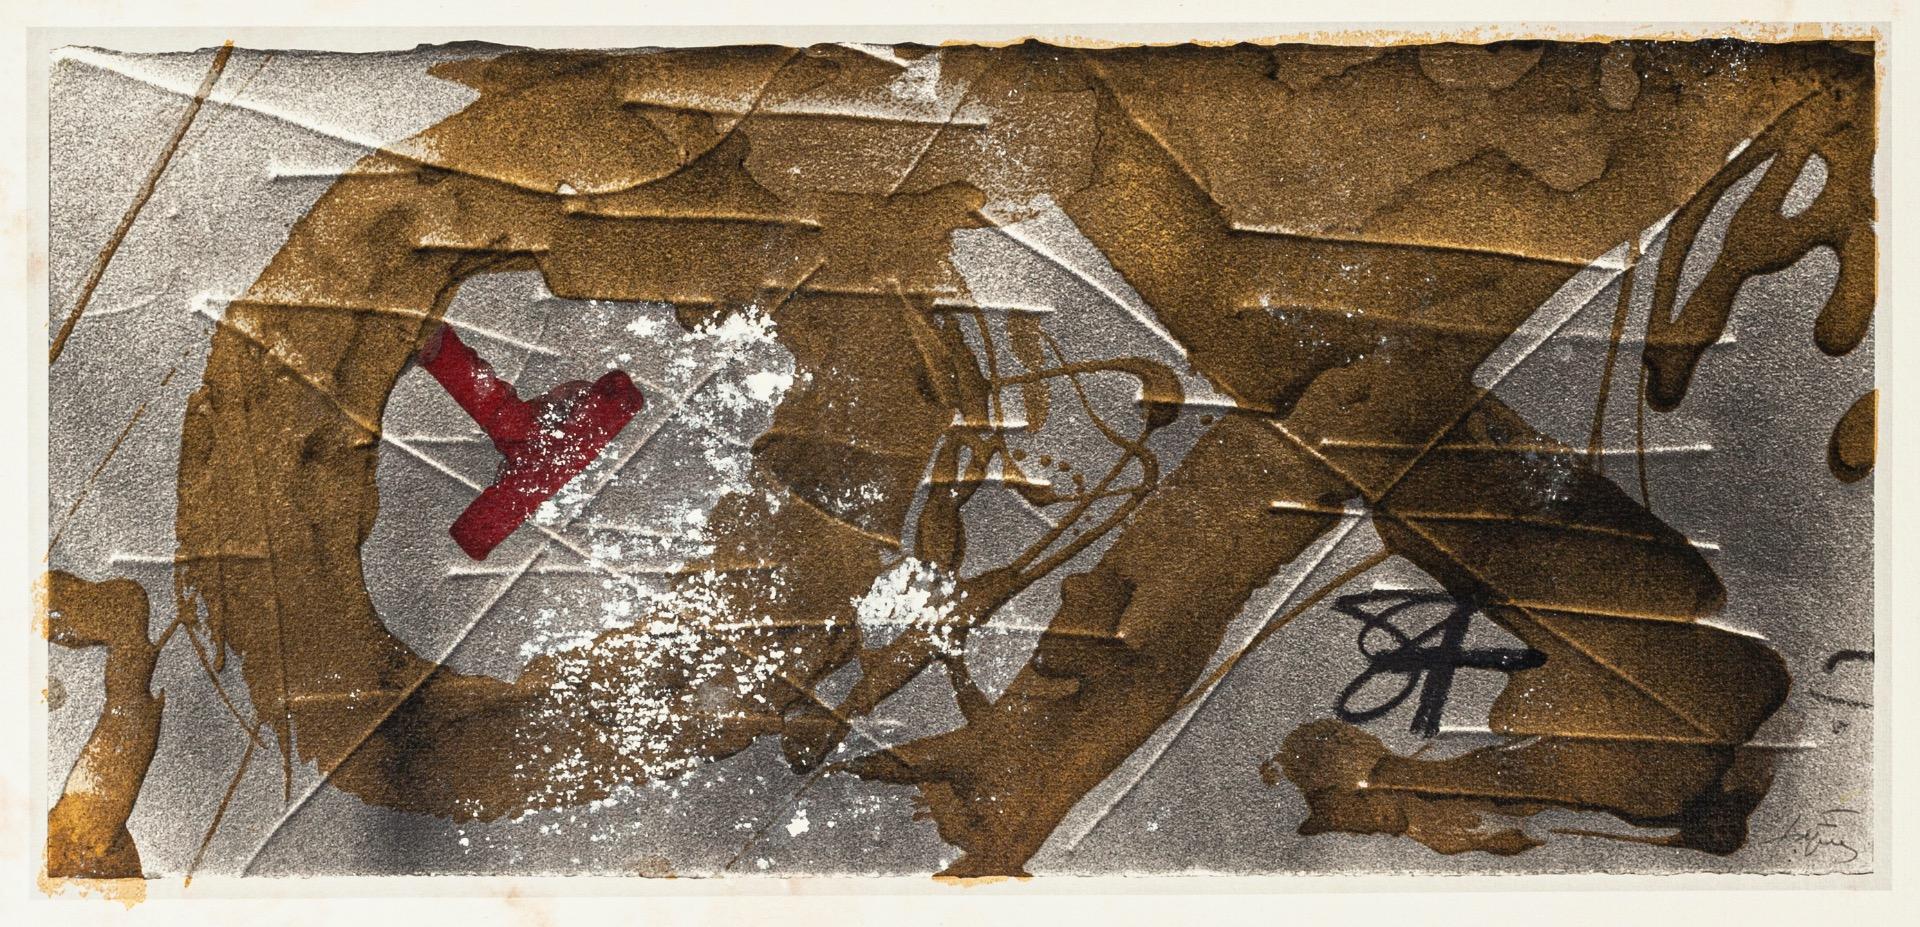 Antoni Tàpies (after) Abstract Print - OEX - Vintage Offset Print After Antoni Tàpies - 1982